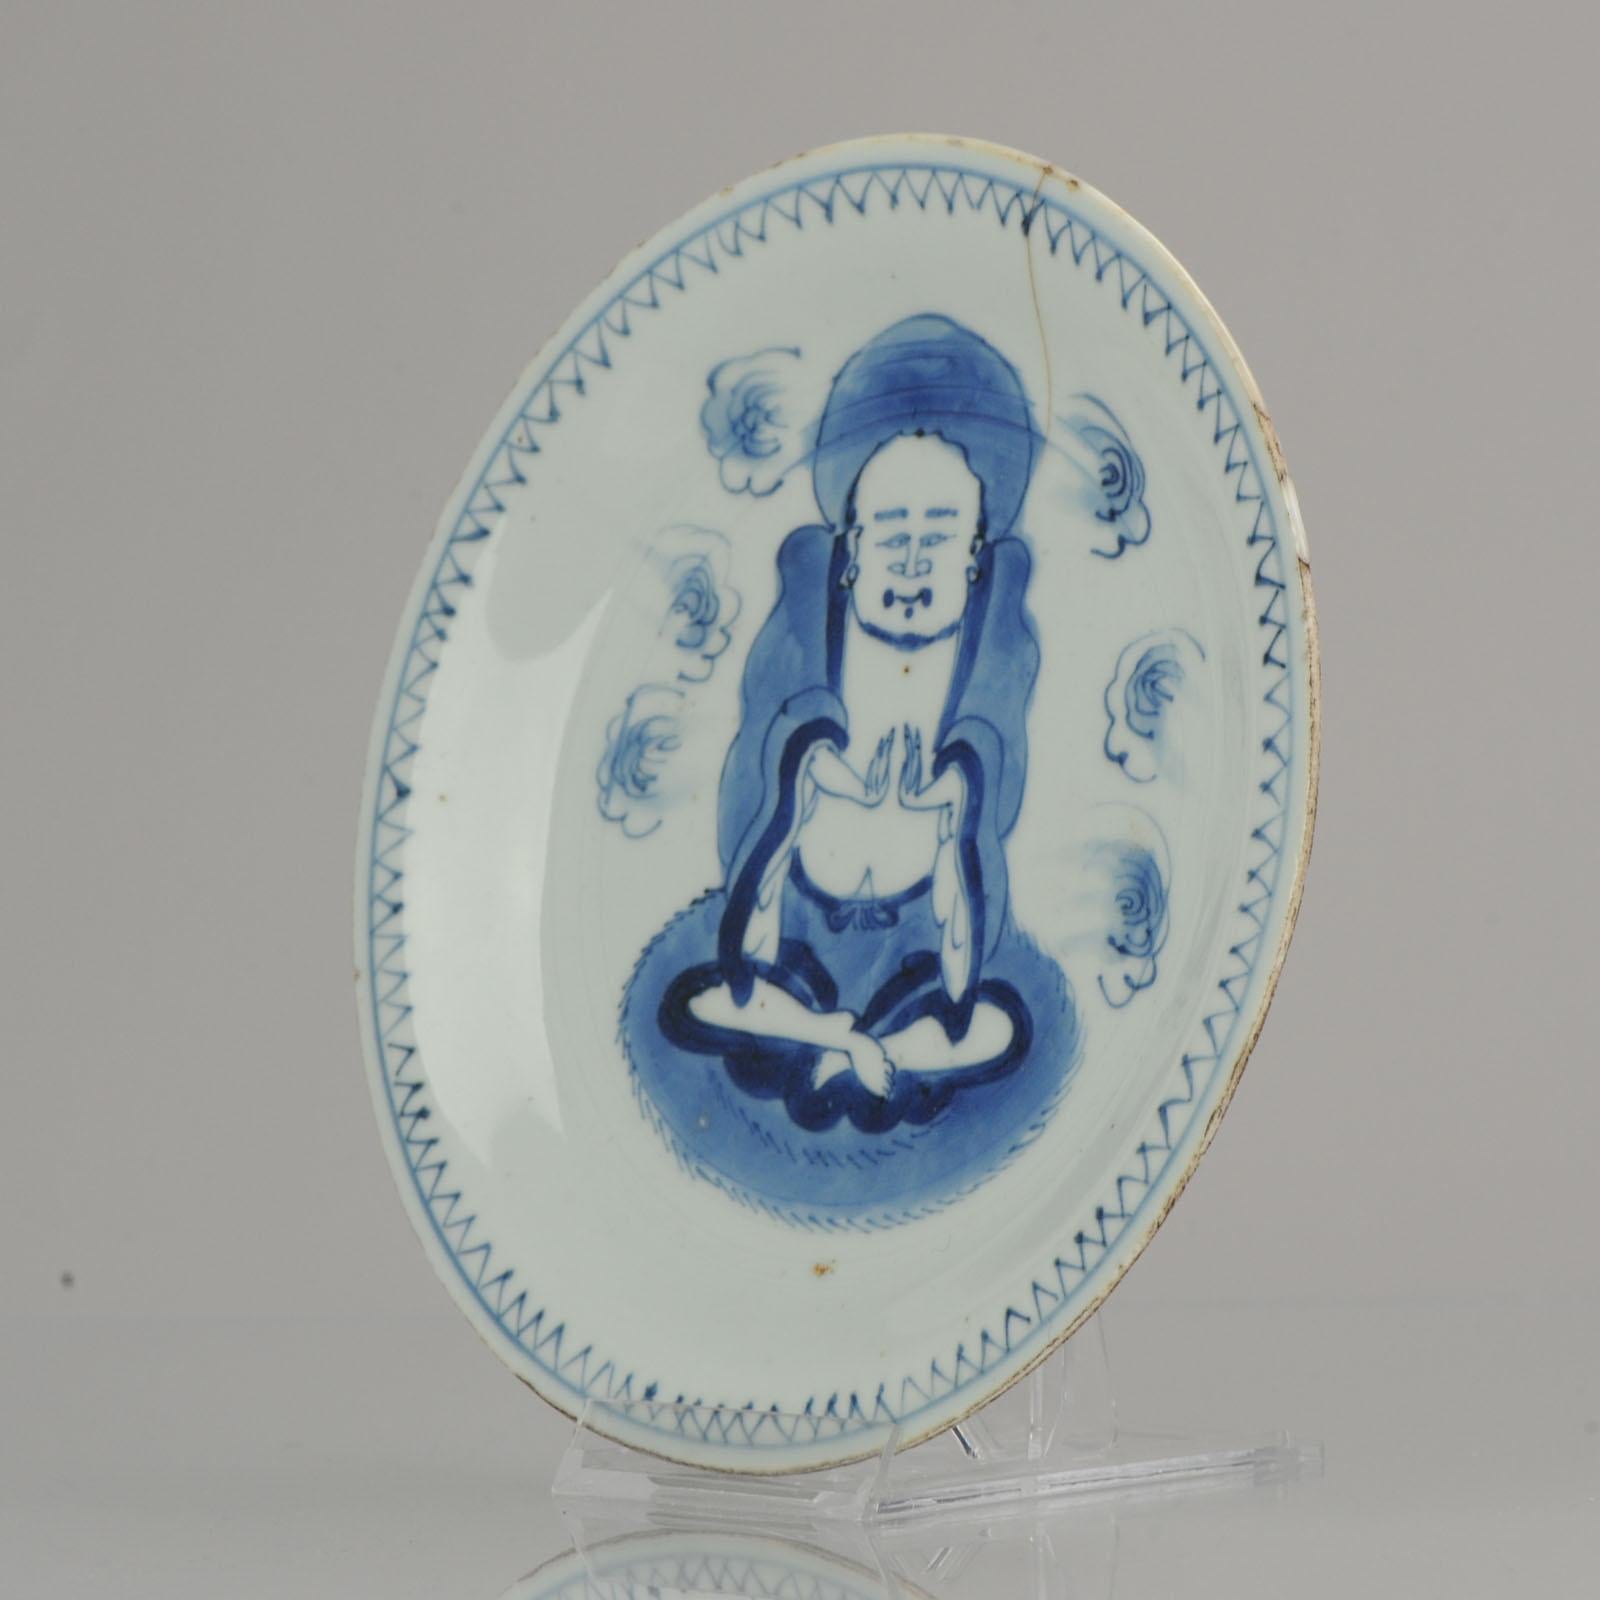 Antique Chinese Wanli / Tianqi Kosometsuke Plate 1600-1644 Porcelain Ming Monk In Good Condition For Sale In Amsterdam, Noord Holland